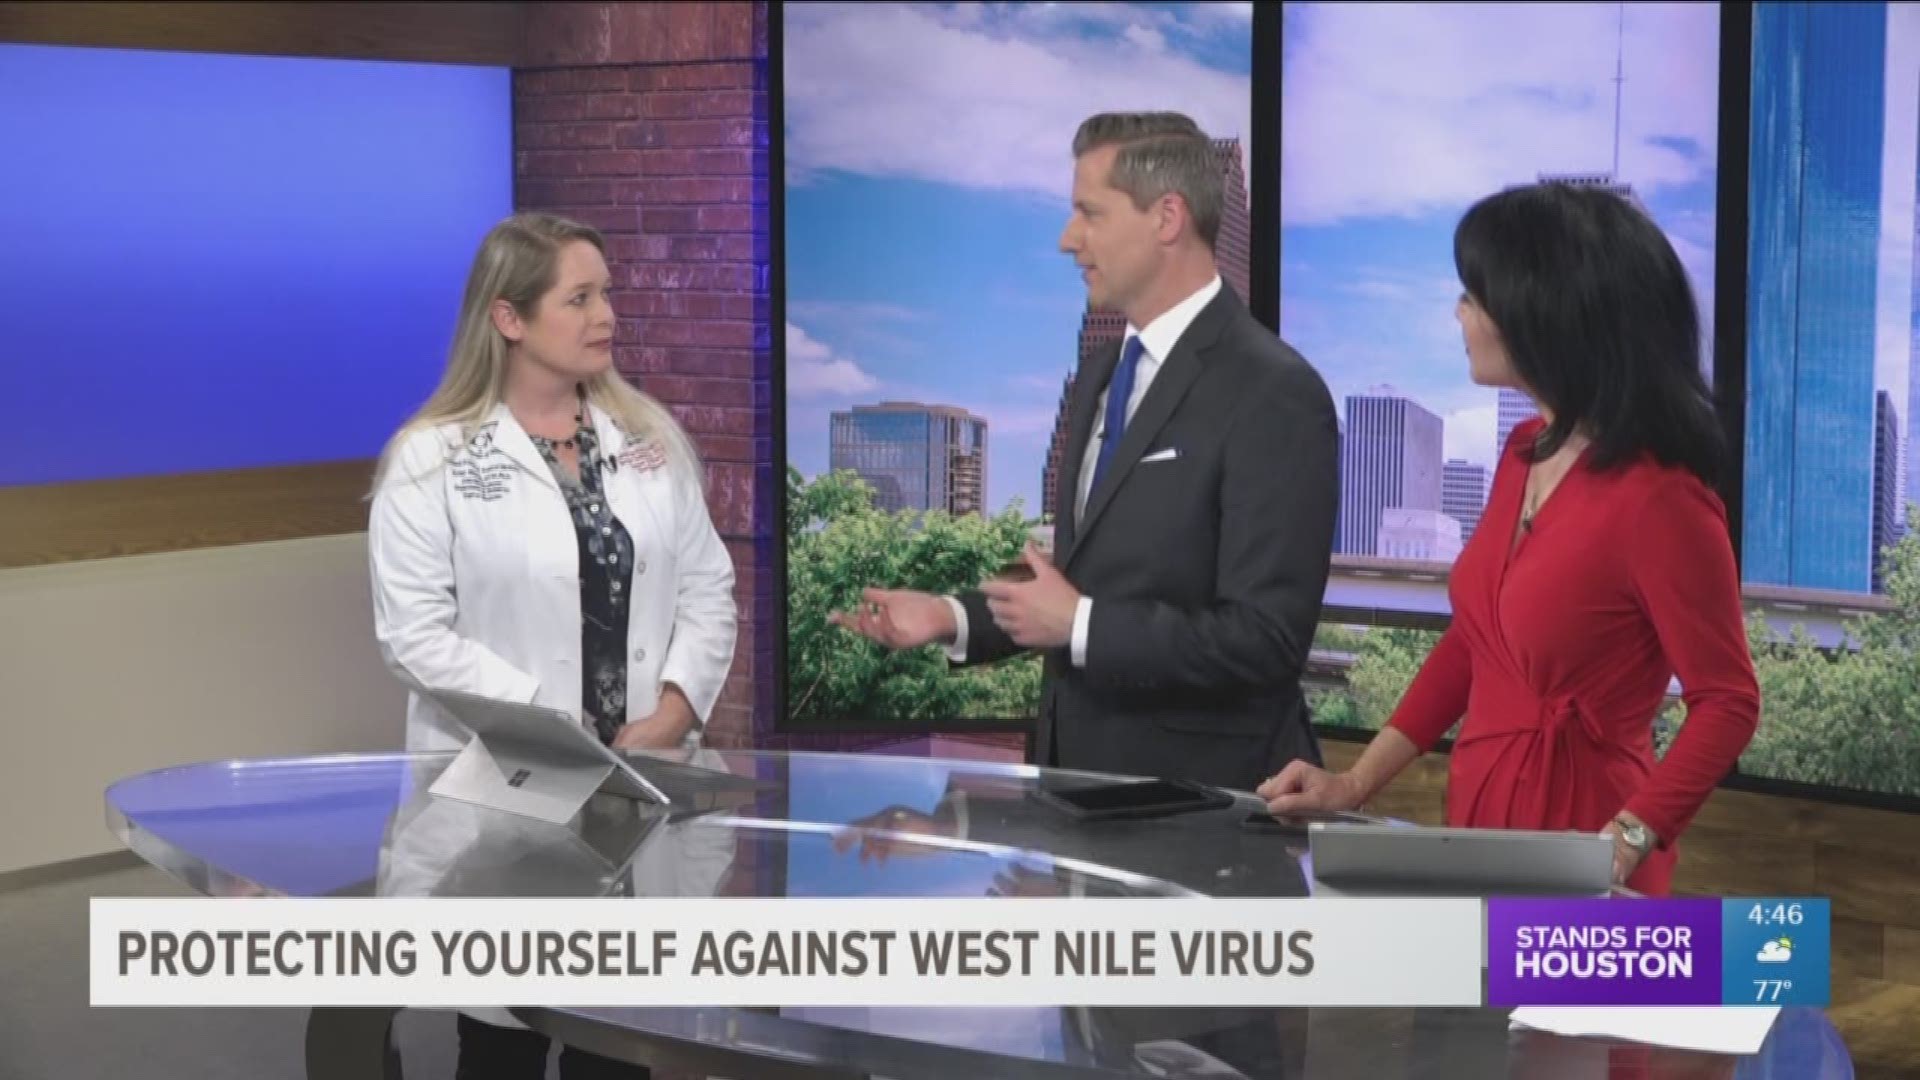 Dr. Kristy Murray with the Baylor College of Medicine speaks with KHOU 11 anchor Jason Bristol and Shern-min Chow about how best to protect yourself against the West Nile virus.